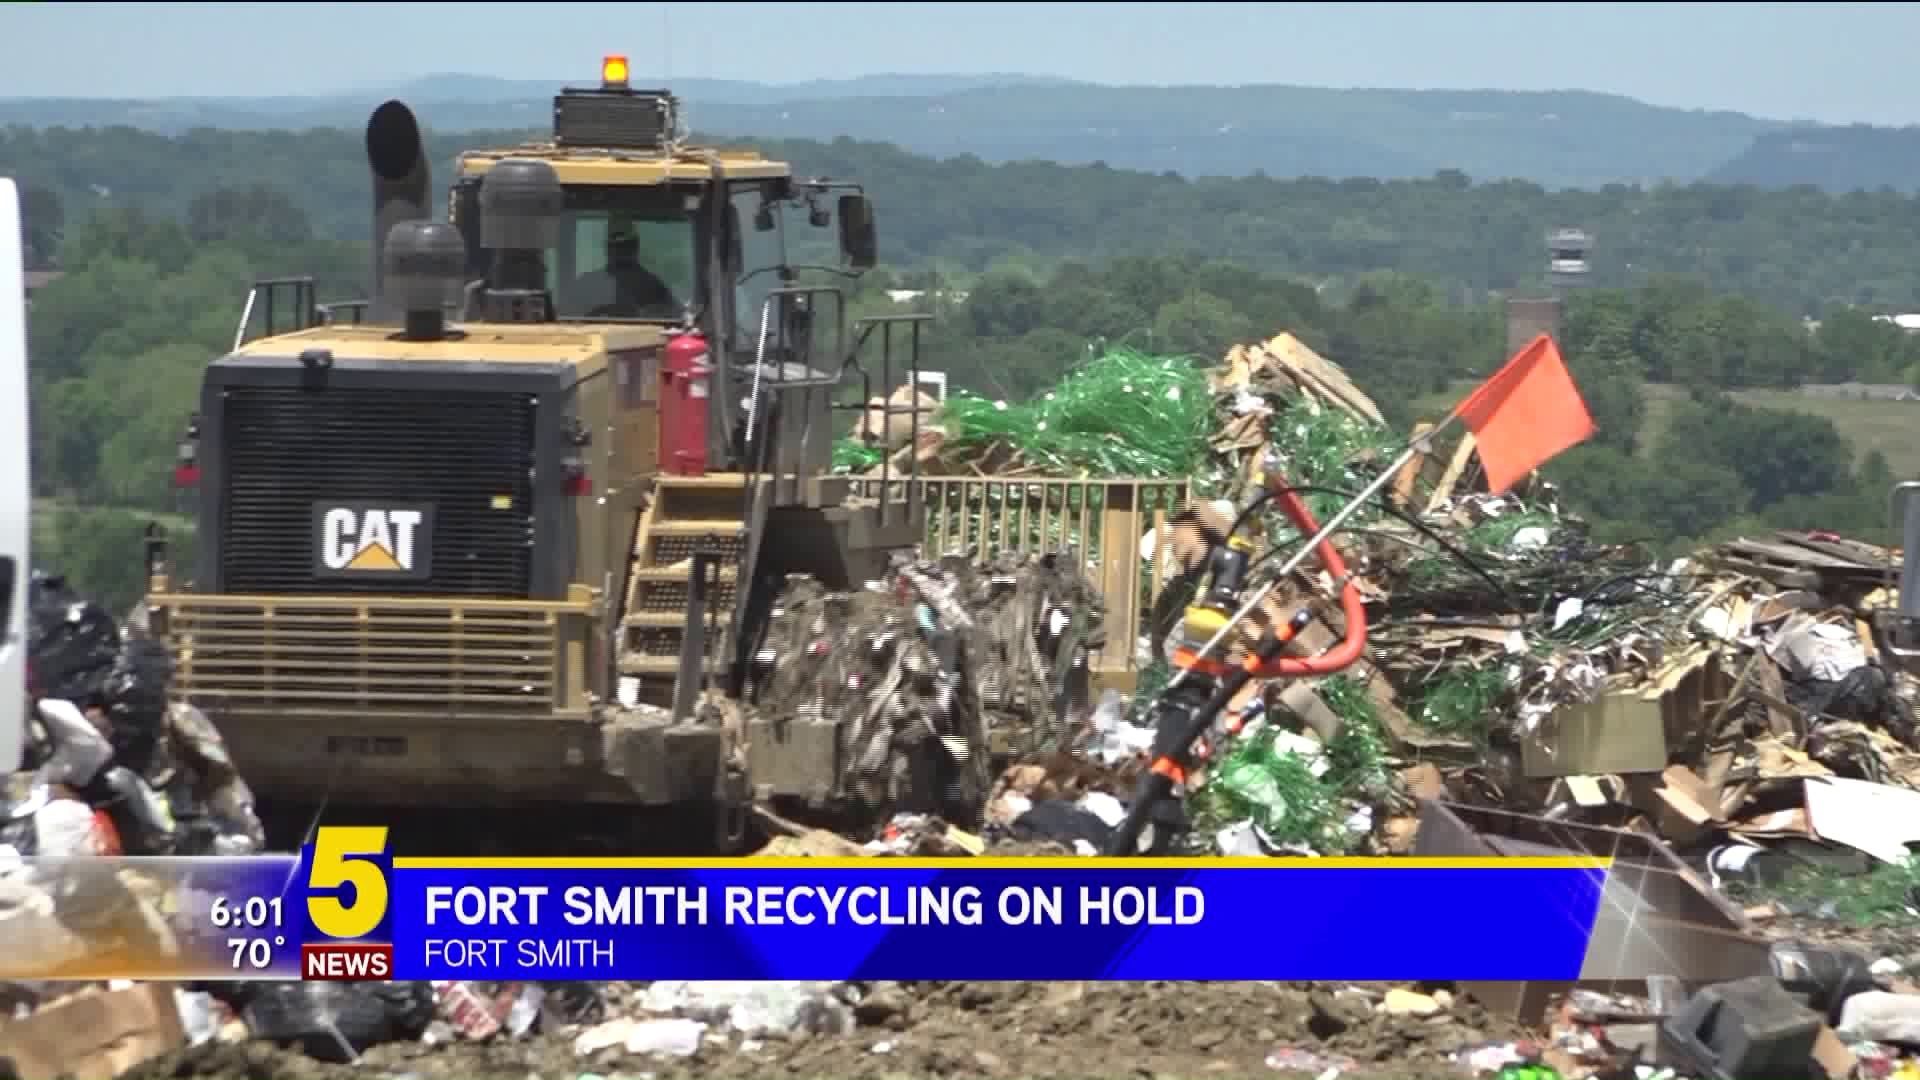 Fort Smith Recycling On Hold